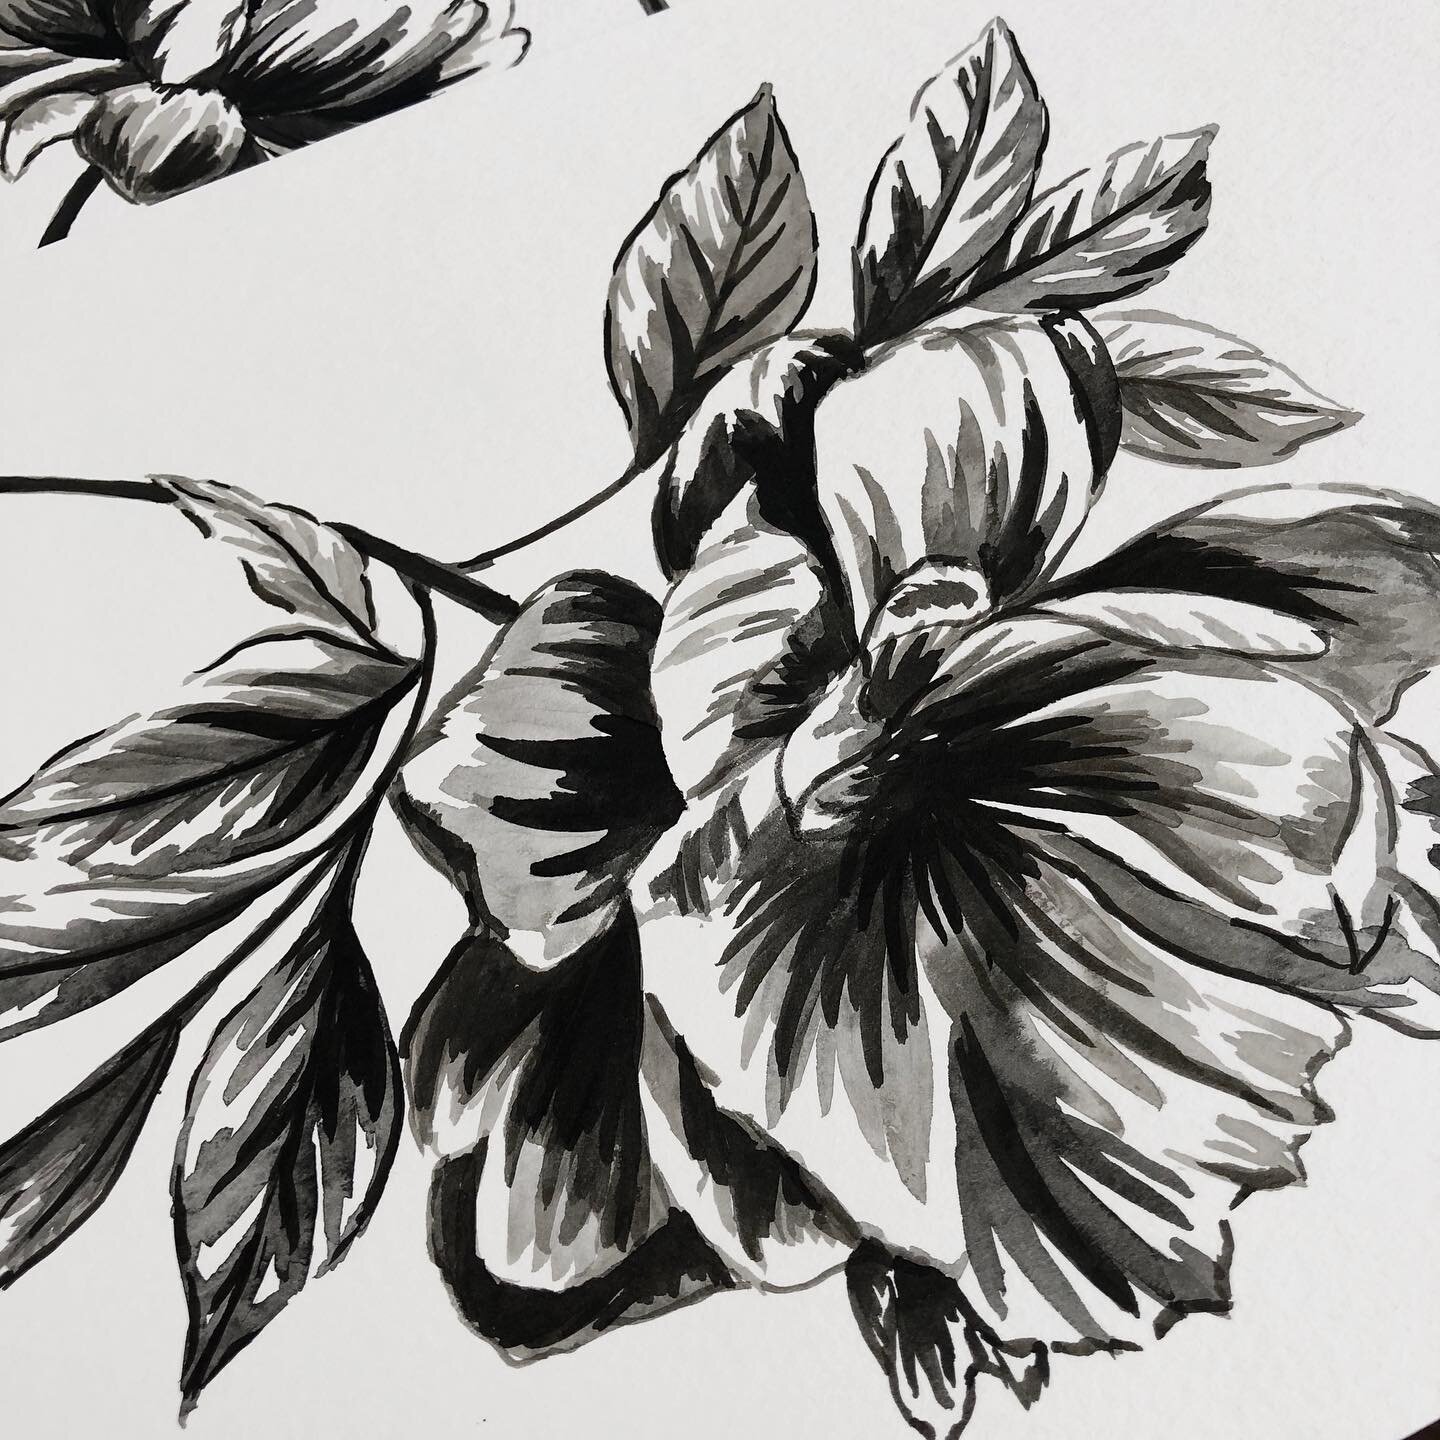 Day 95/100...Black and white flowers... #watercolorflowers #floralpainting #floralsketch #sumiink #watercolorfloral  #everydaywatercolor #princetonbrushes #flower #floralart #flowerdrawing #floral #floraldrawing #peony #greyscale #botanical #botanica